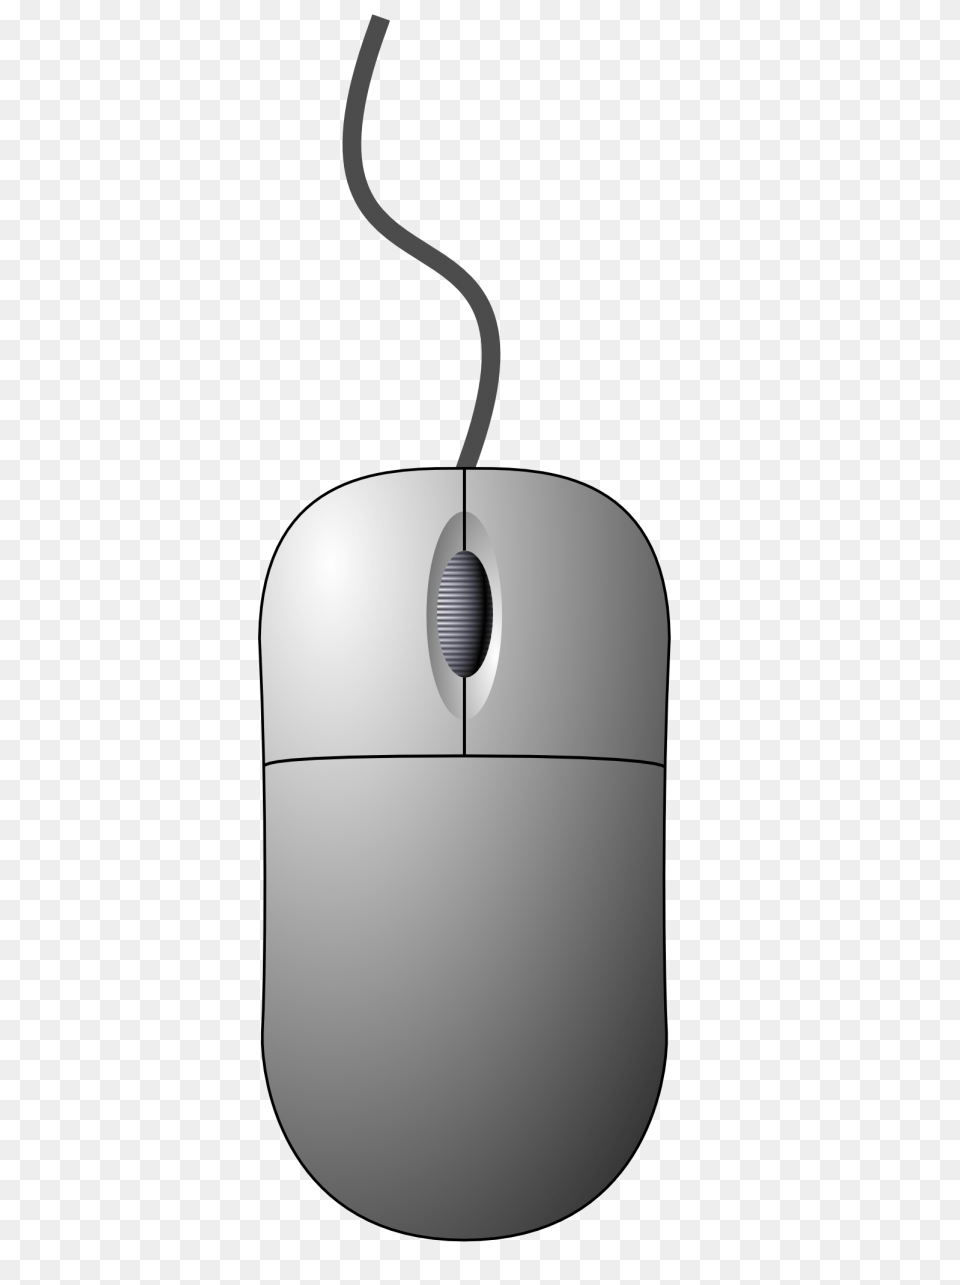 Computer Mouse Download, Computer Hardware, Electronics, Hardware, Astronomy Png Image